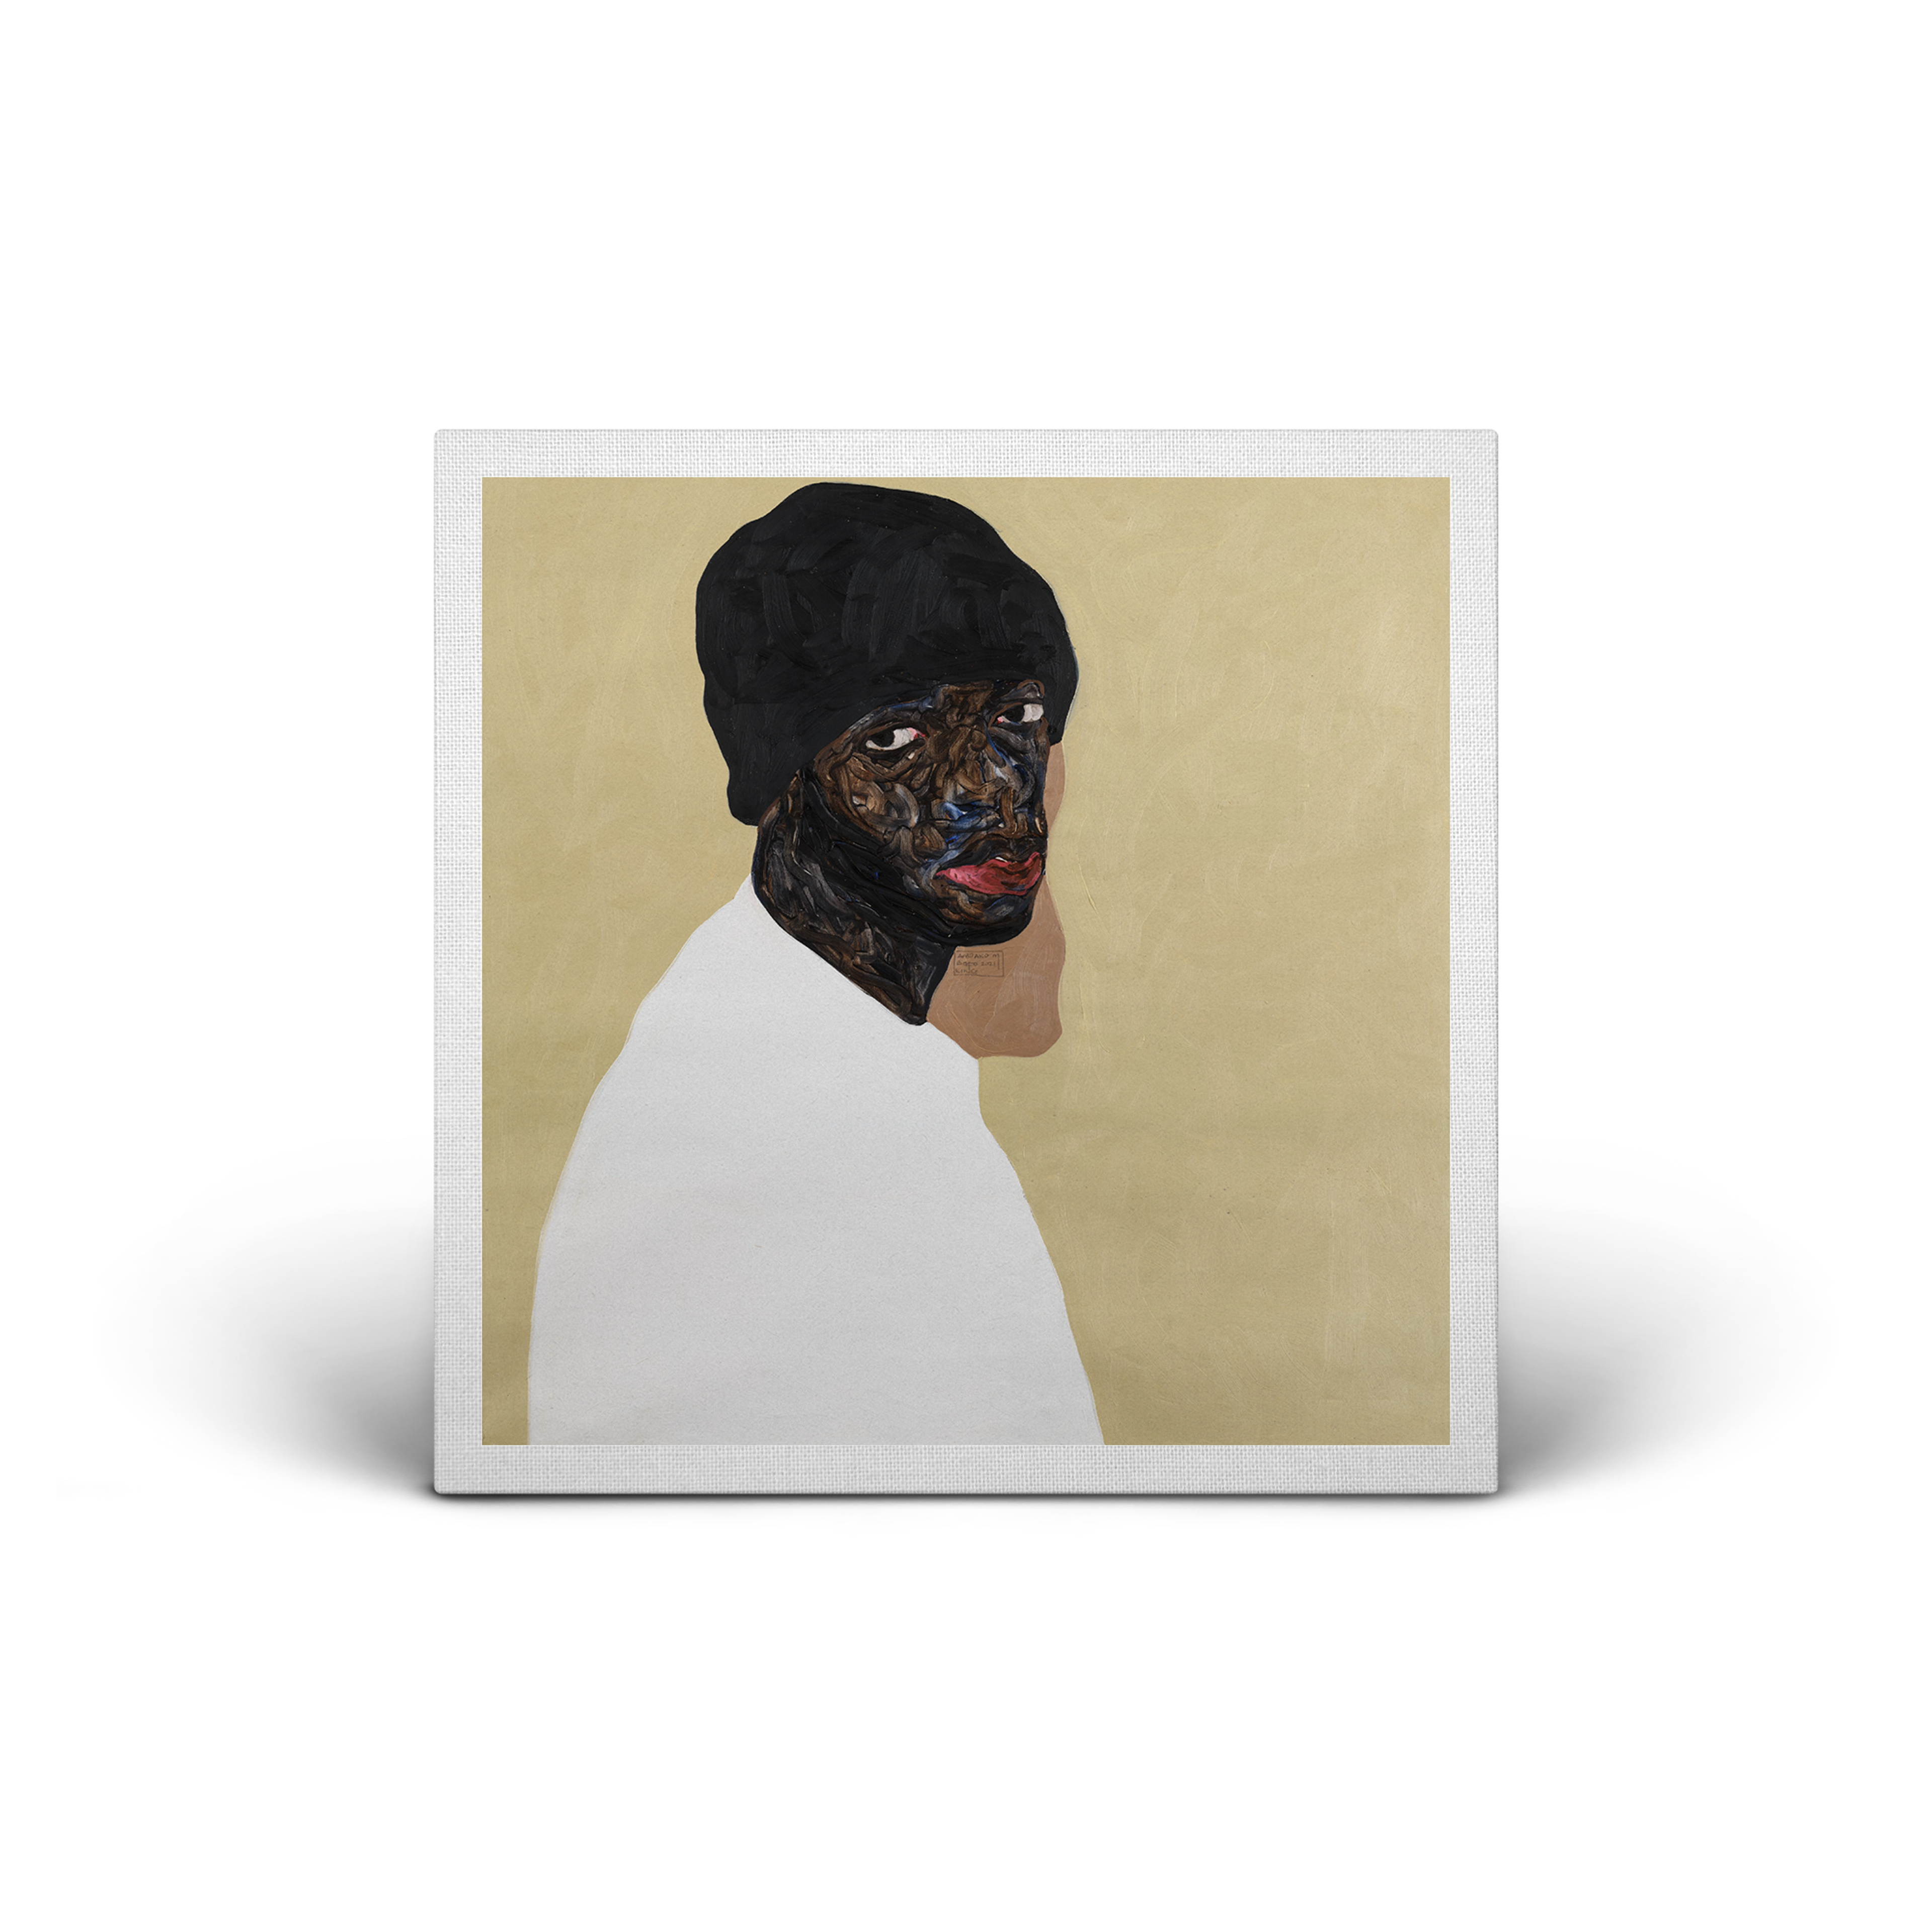 Alternate View 1 of 6lack - Free 6lack by Amoako Boafo Gallery Vinyl